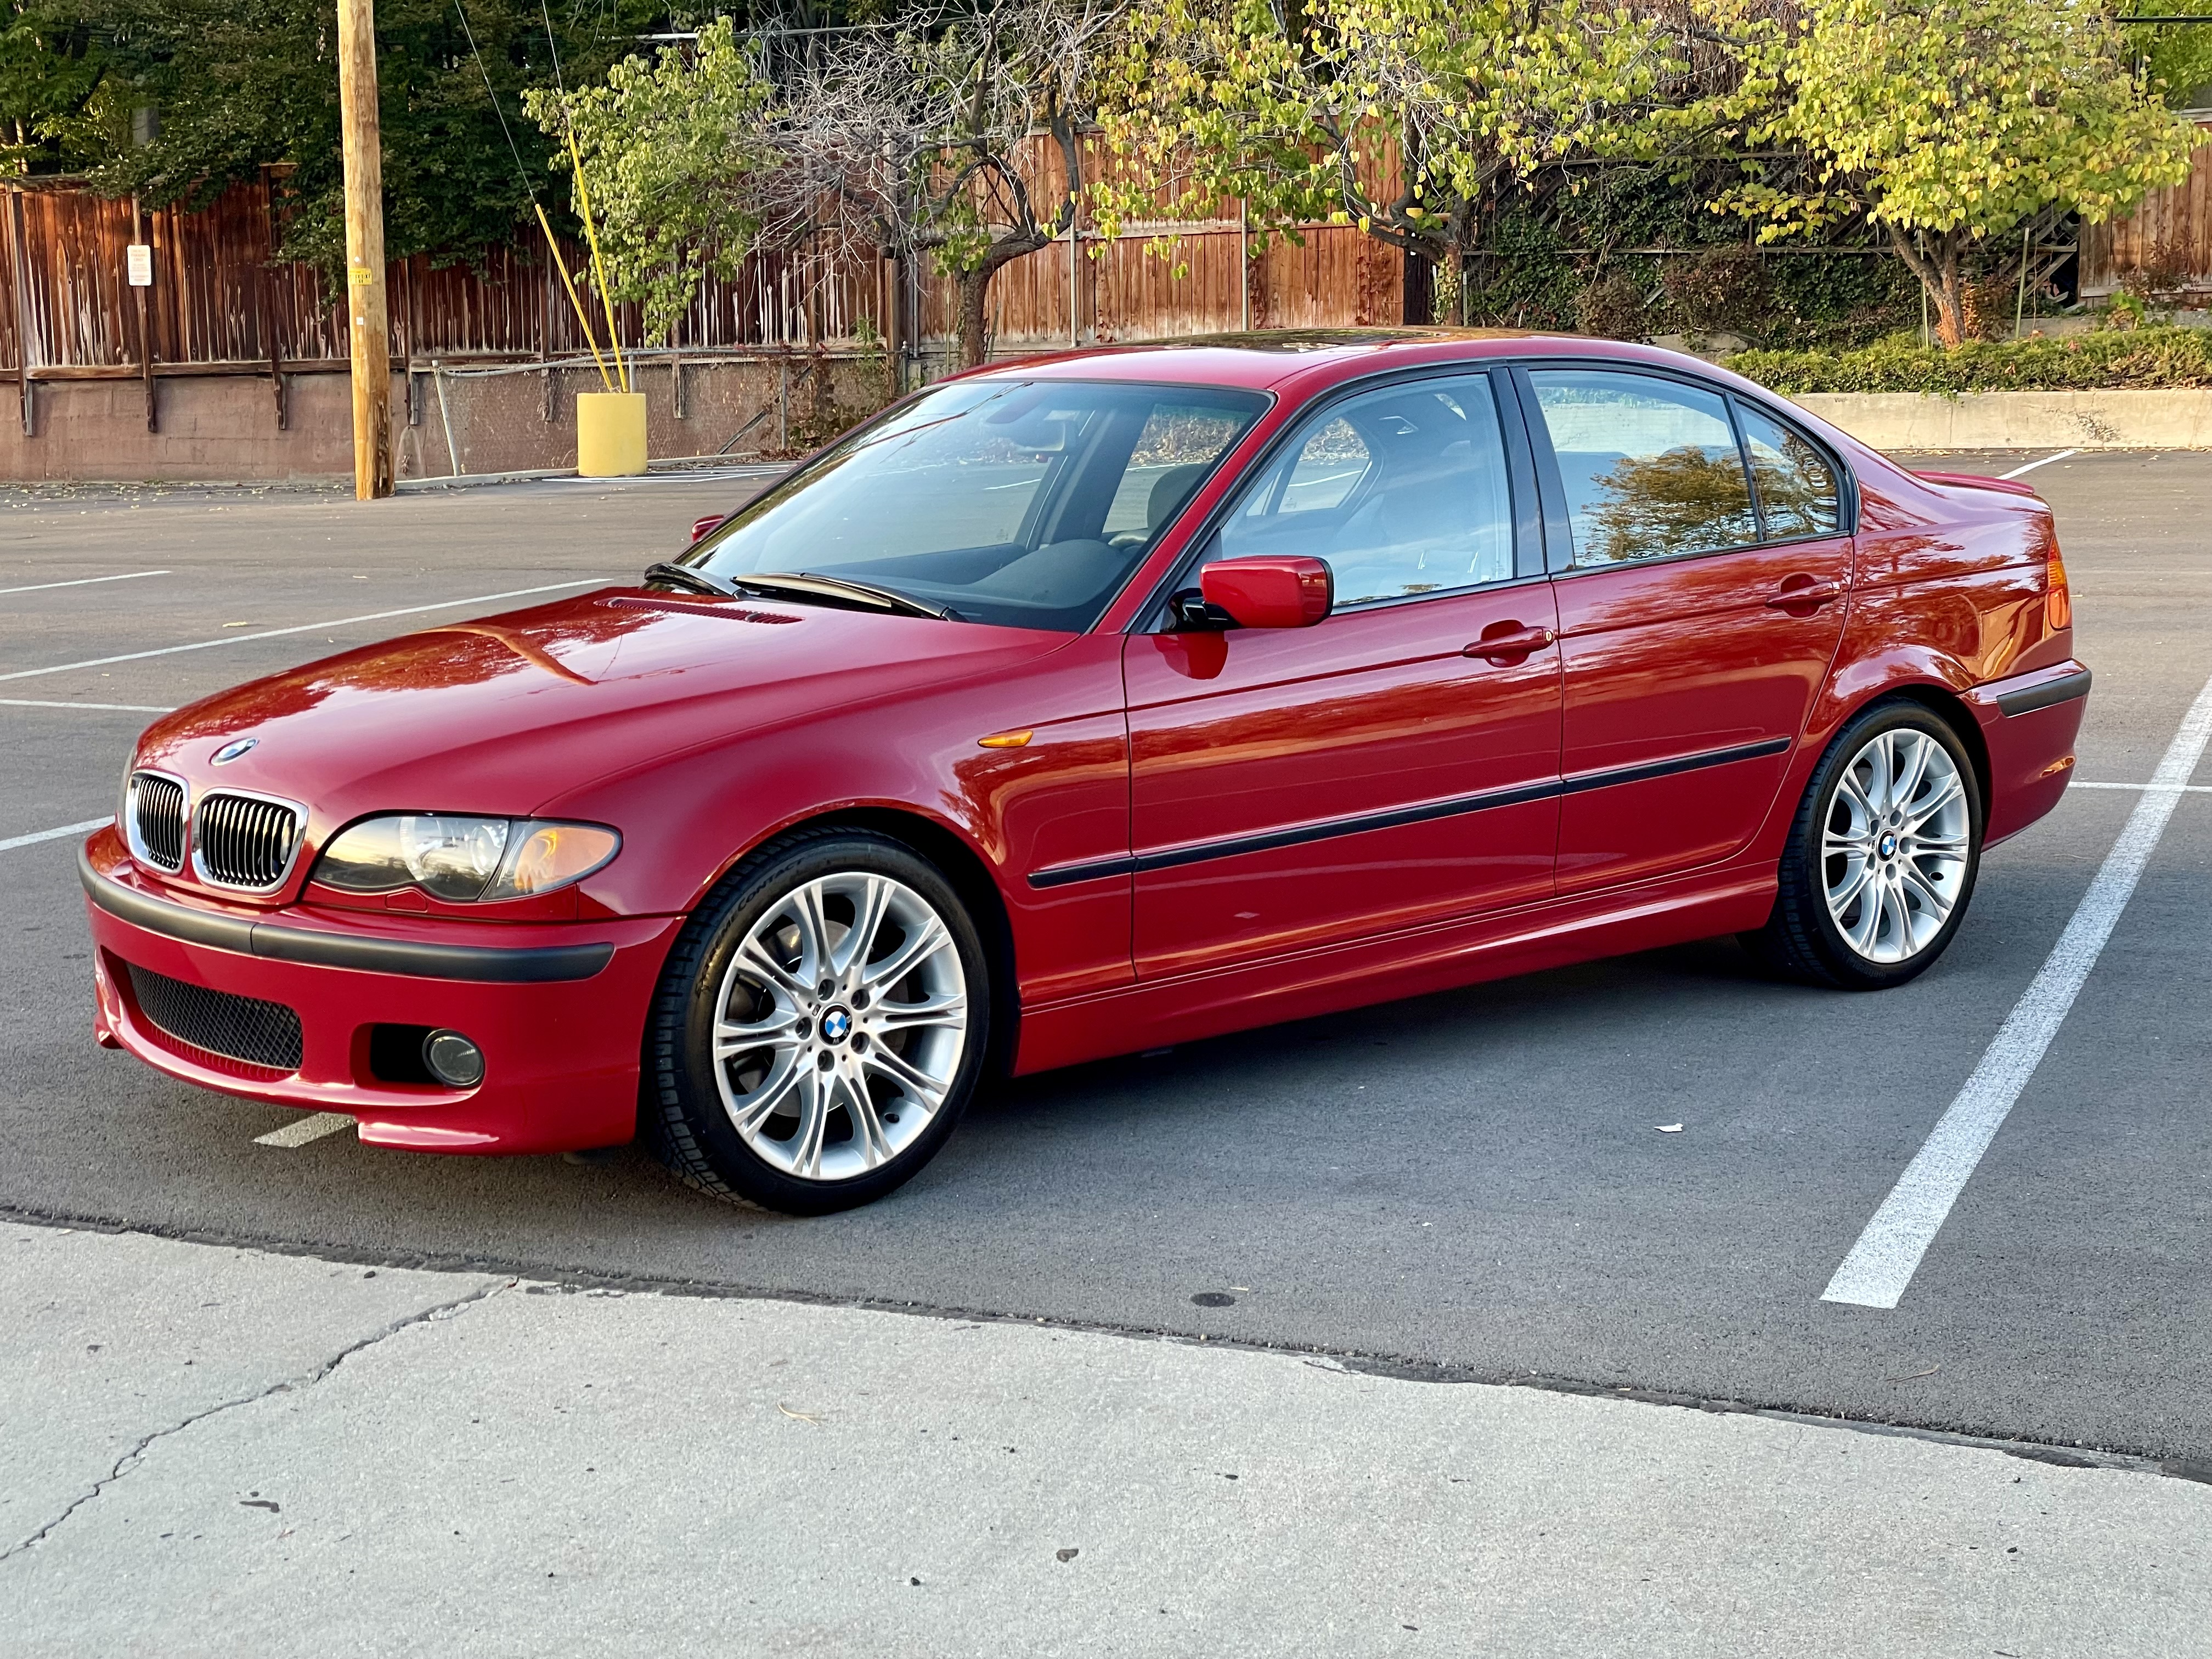 Used 2005 BMW 3 Series for Sale Near Me